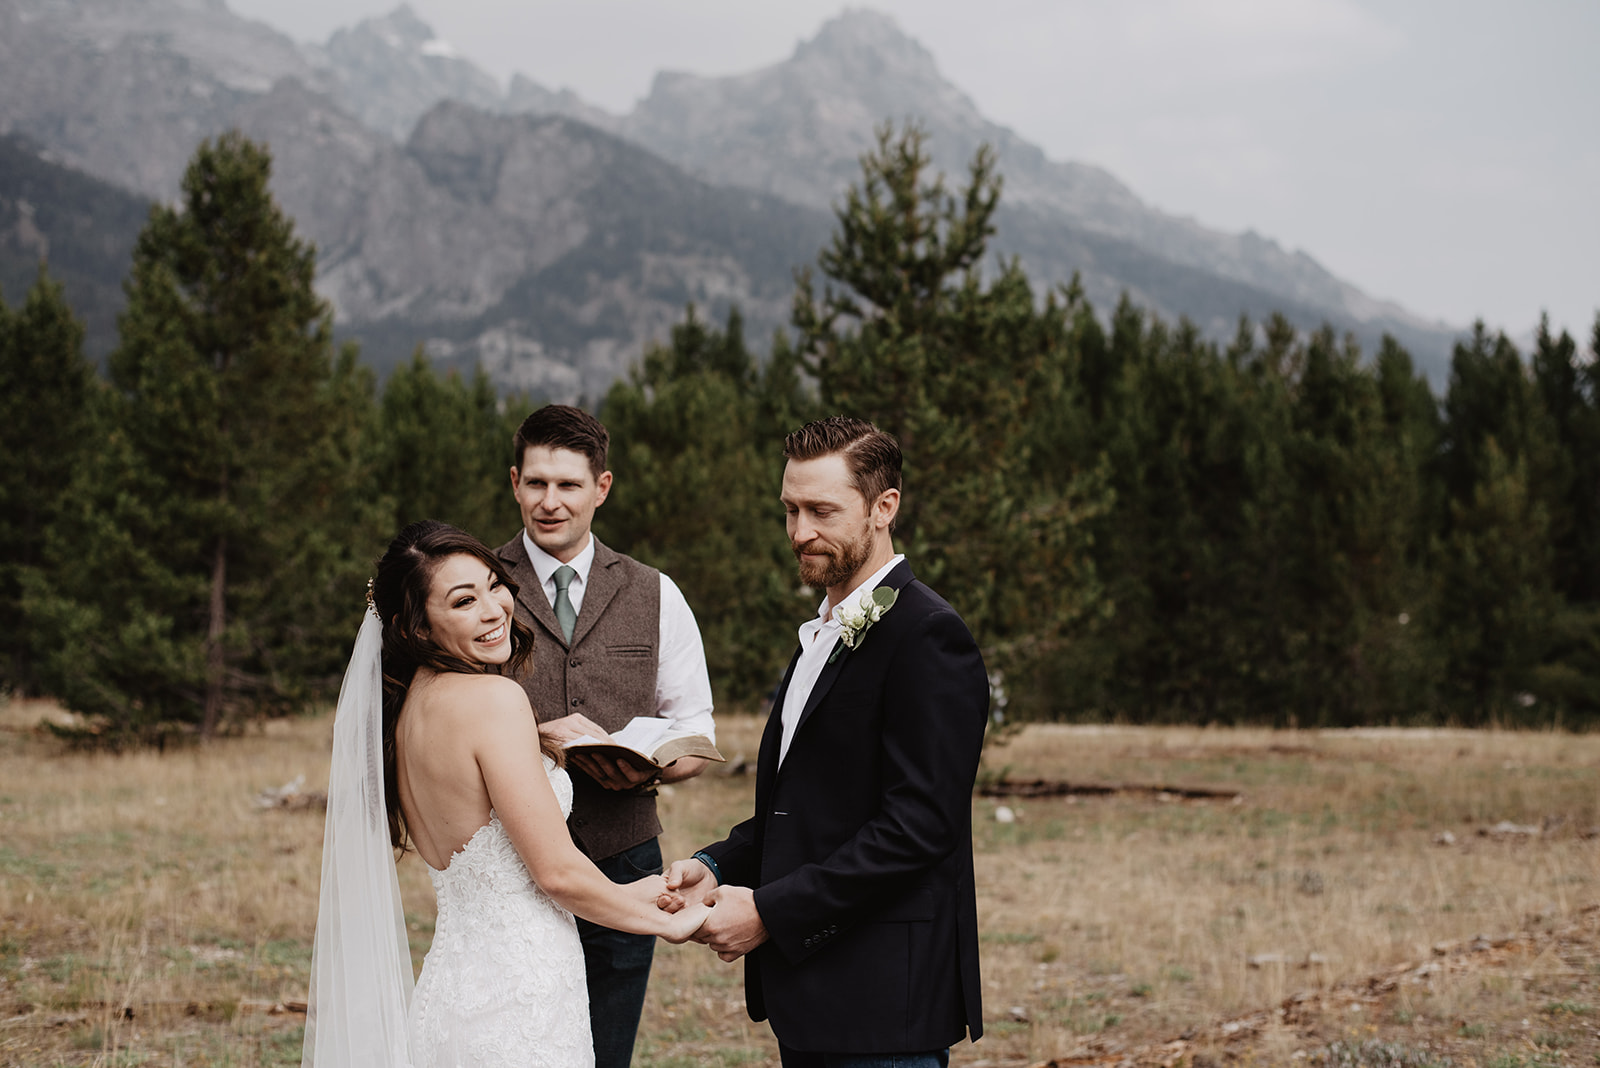 Taggart Lake wedding ceremony with bride smiling over her shoulder as she holds her grooms hands and the officiant marries the couple